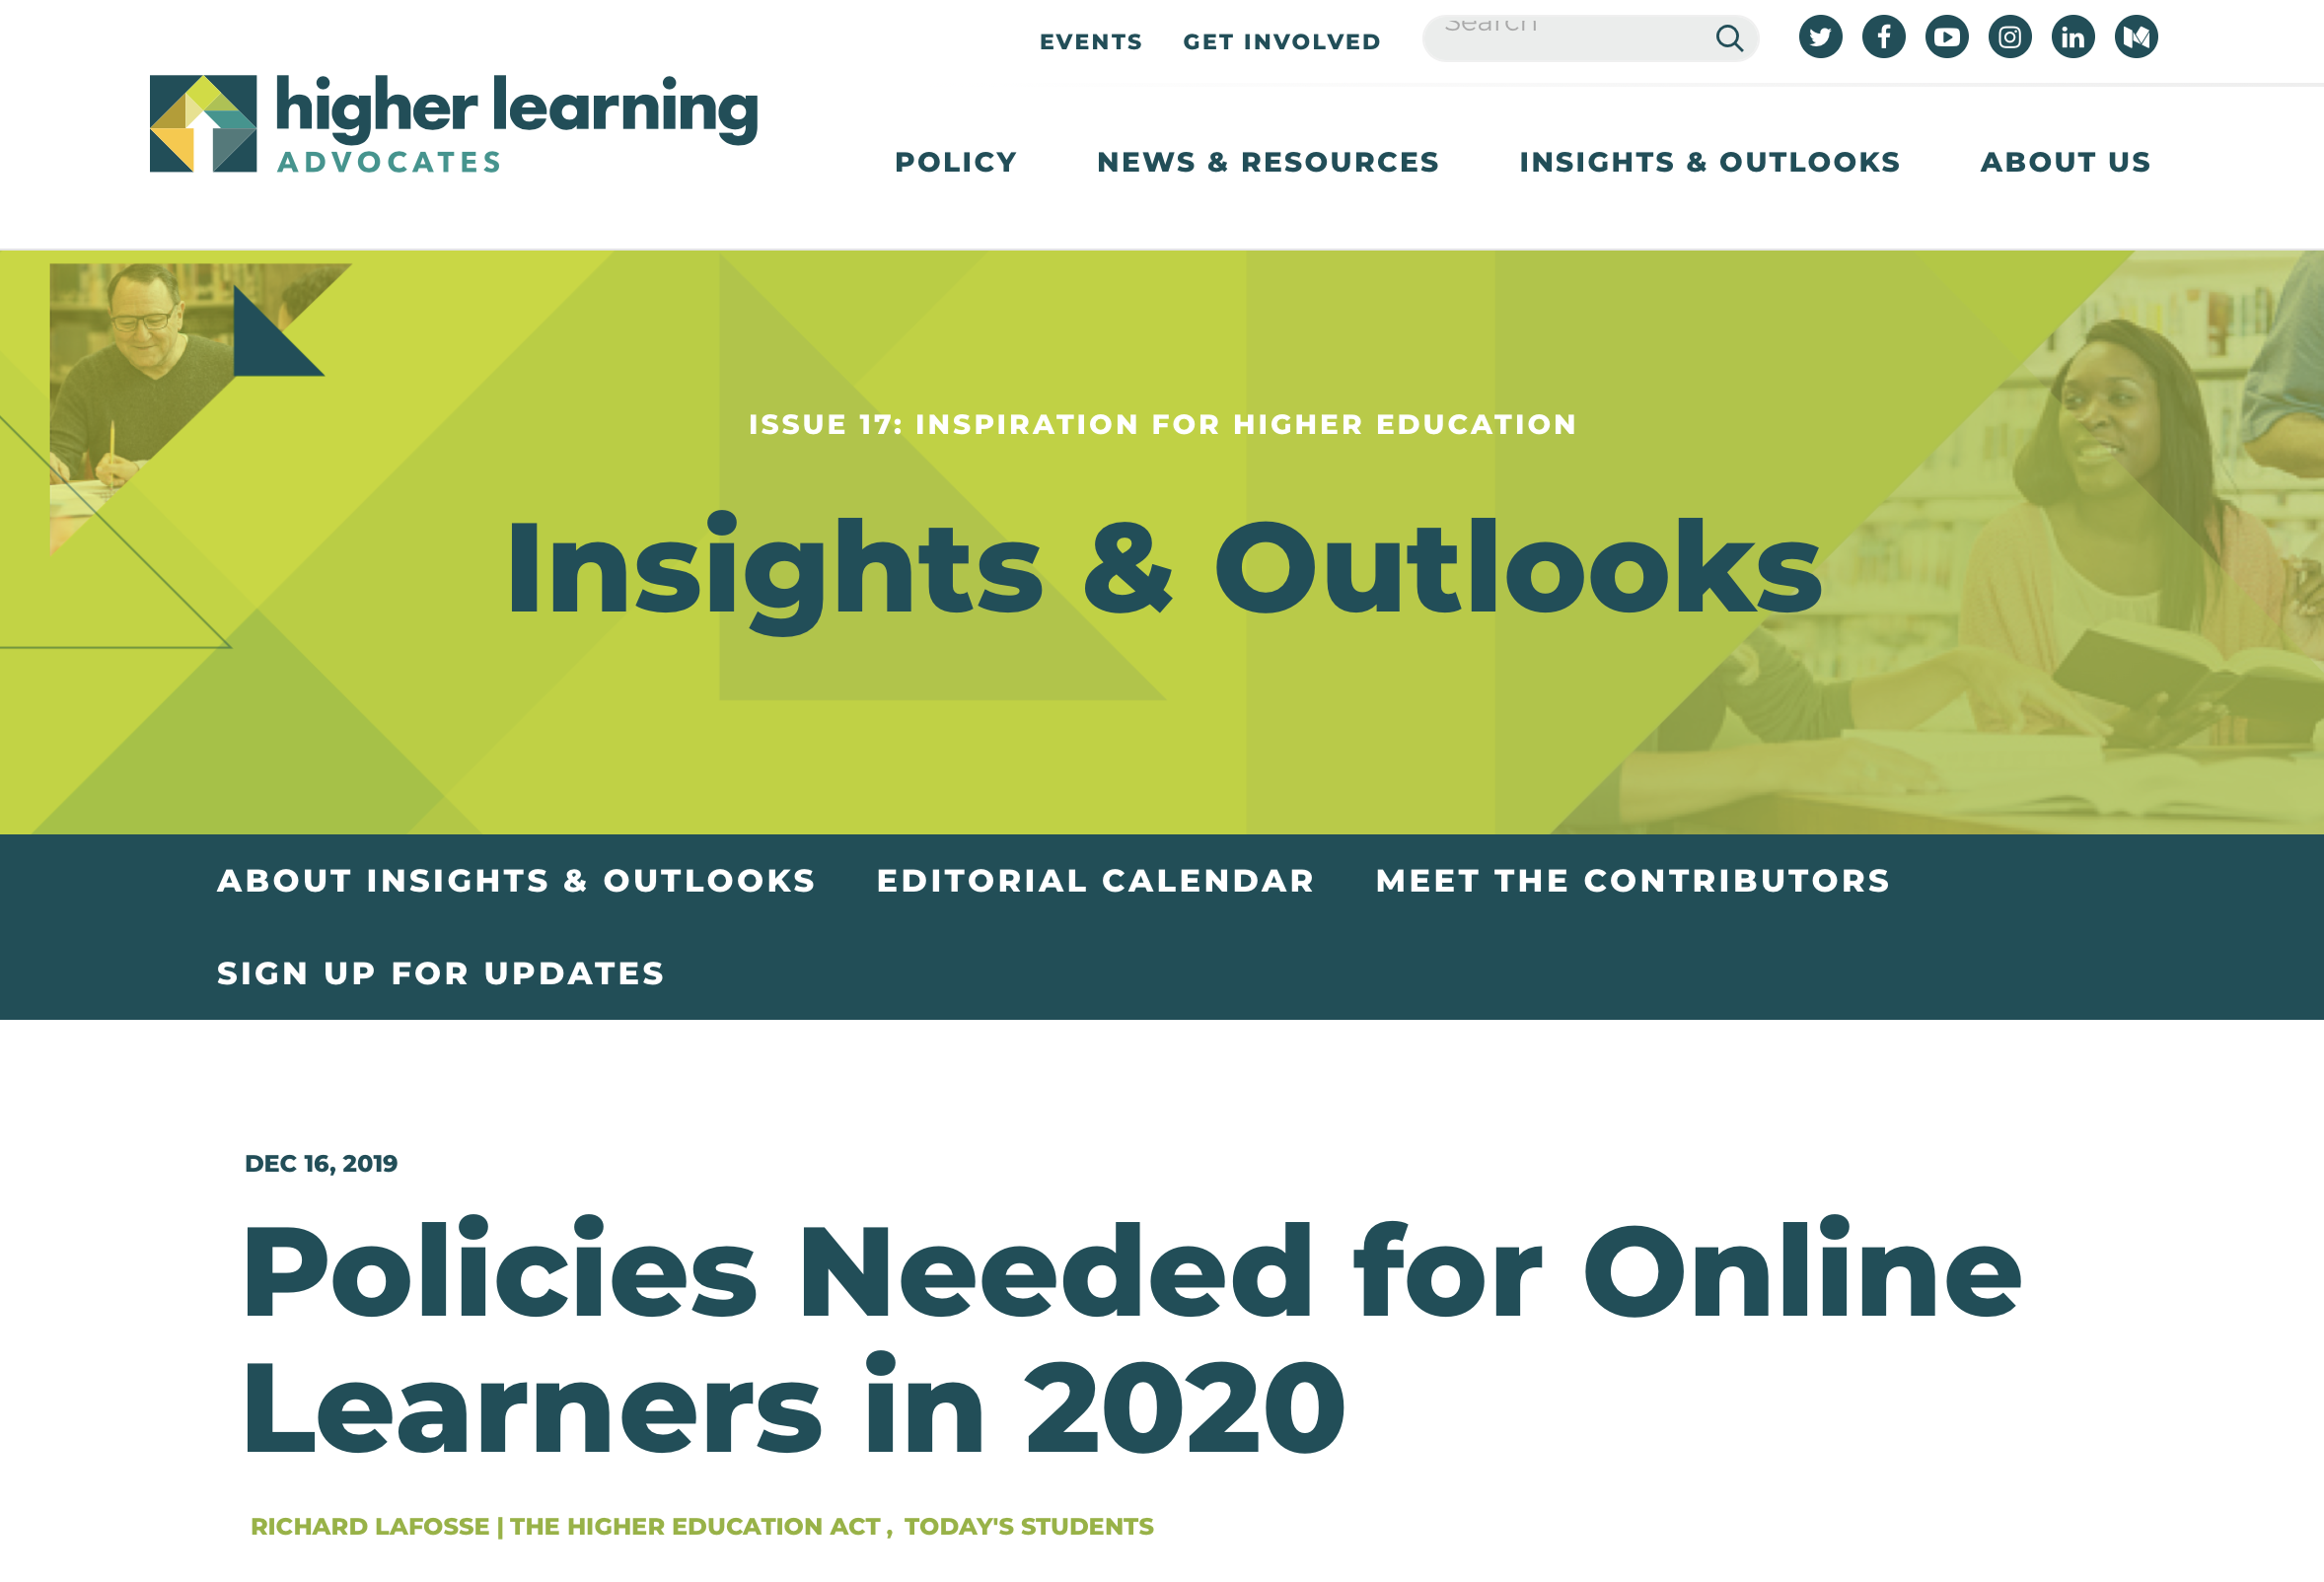 Policies Needed for Online Learners in 2020